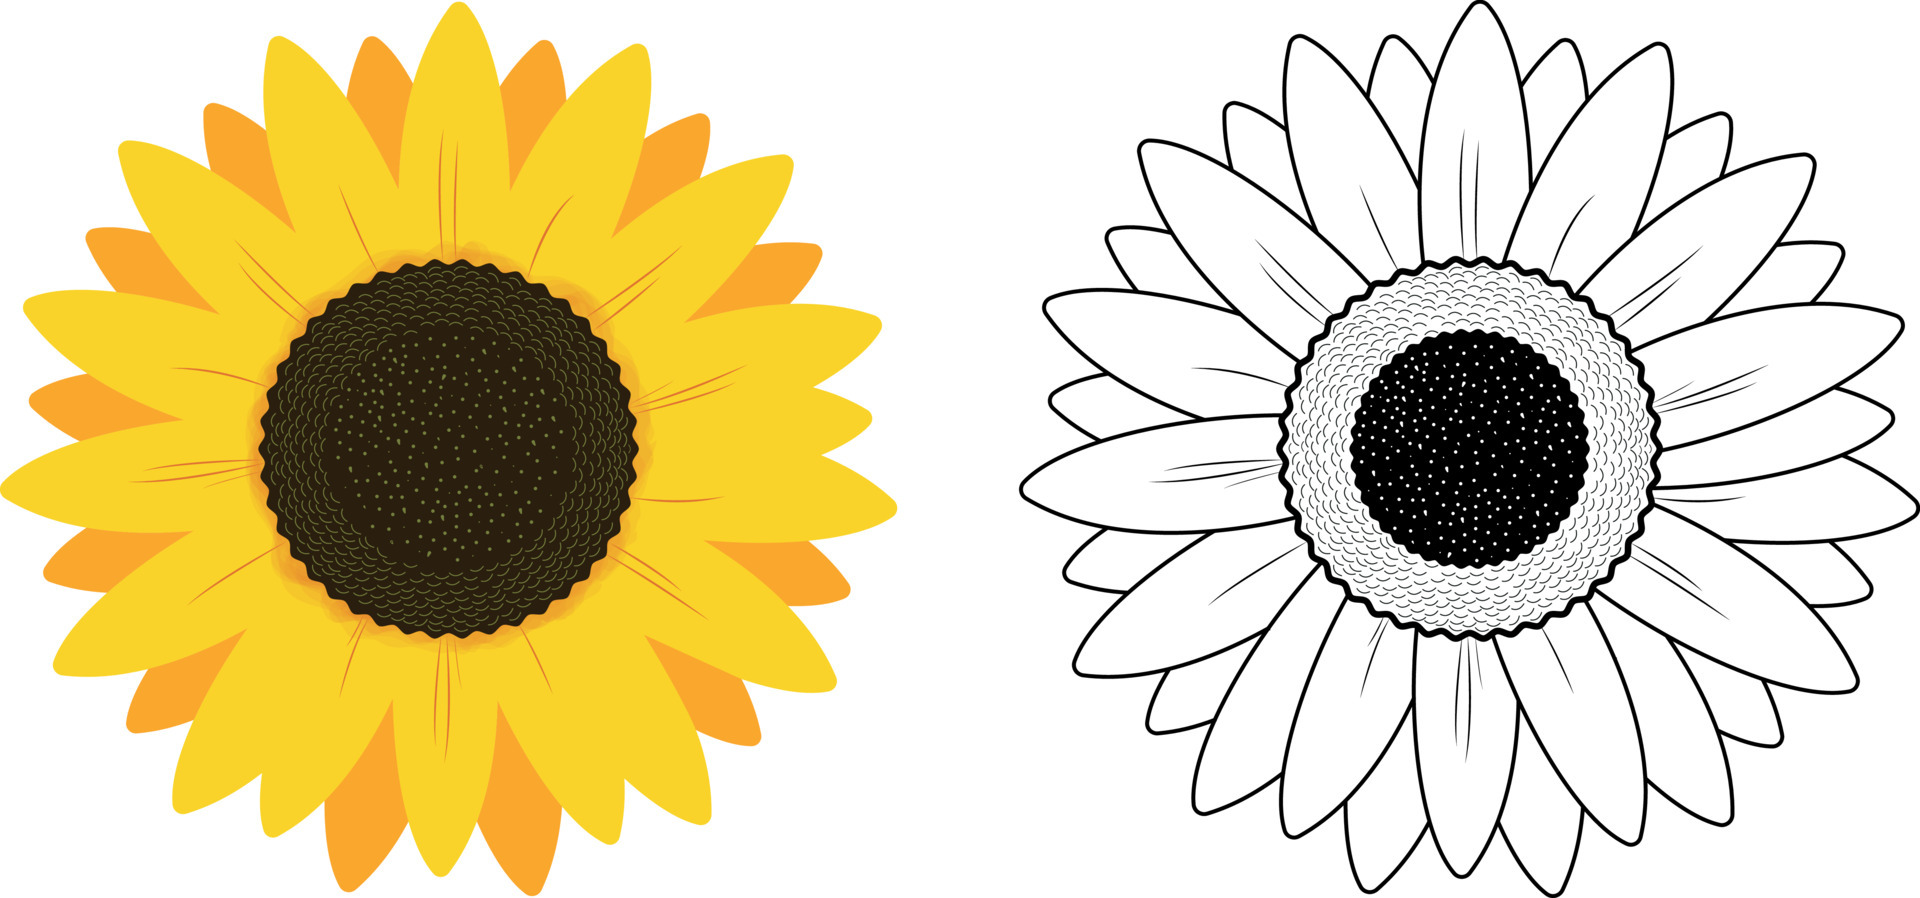 Printable Sunflower Cut Out Template_21988